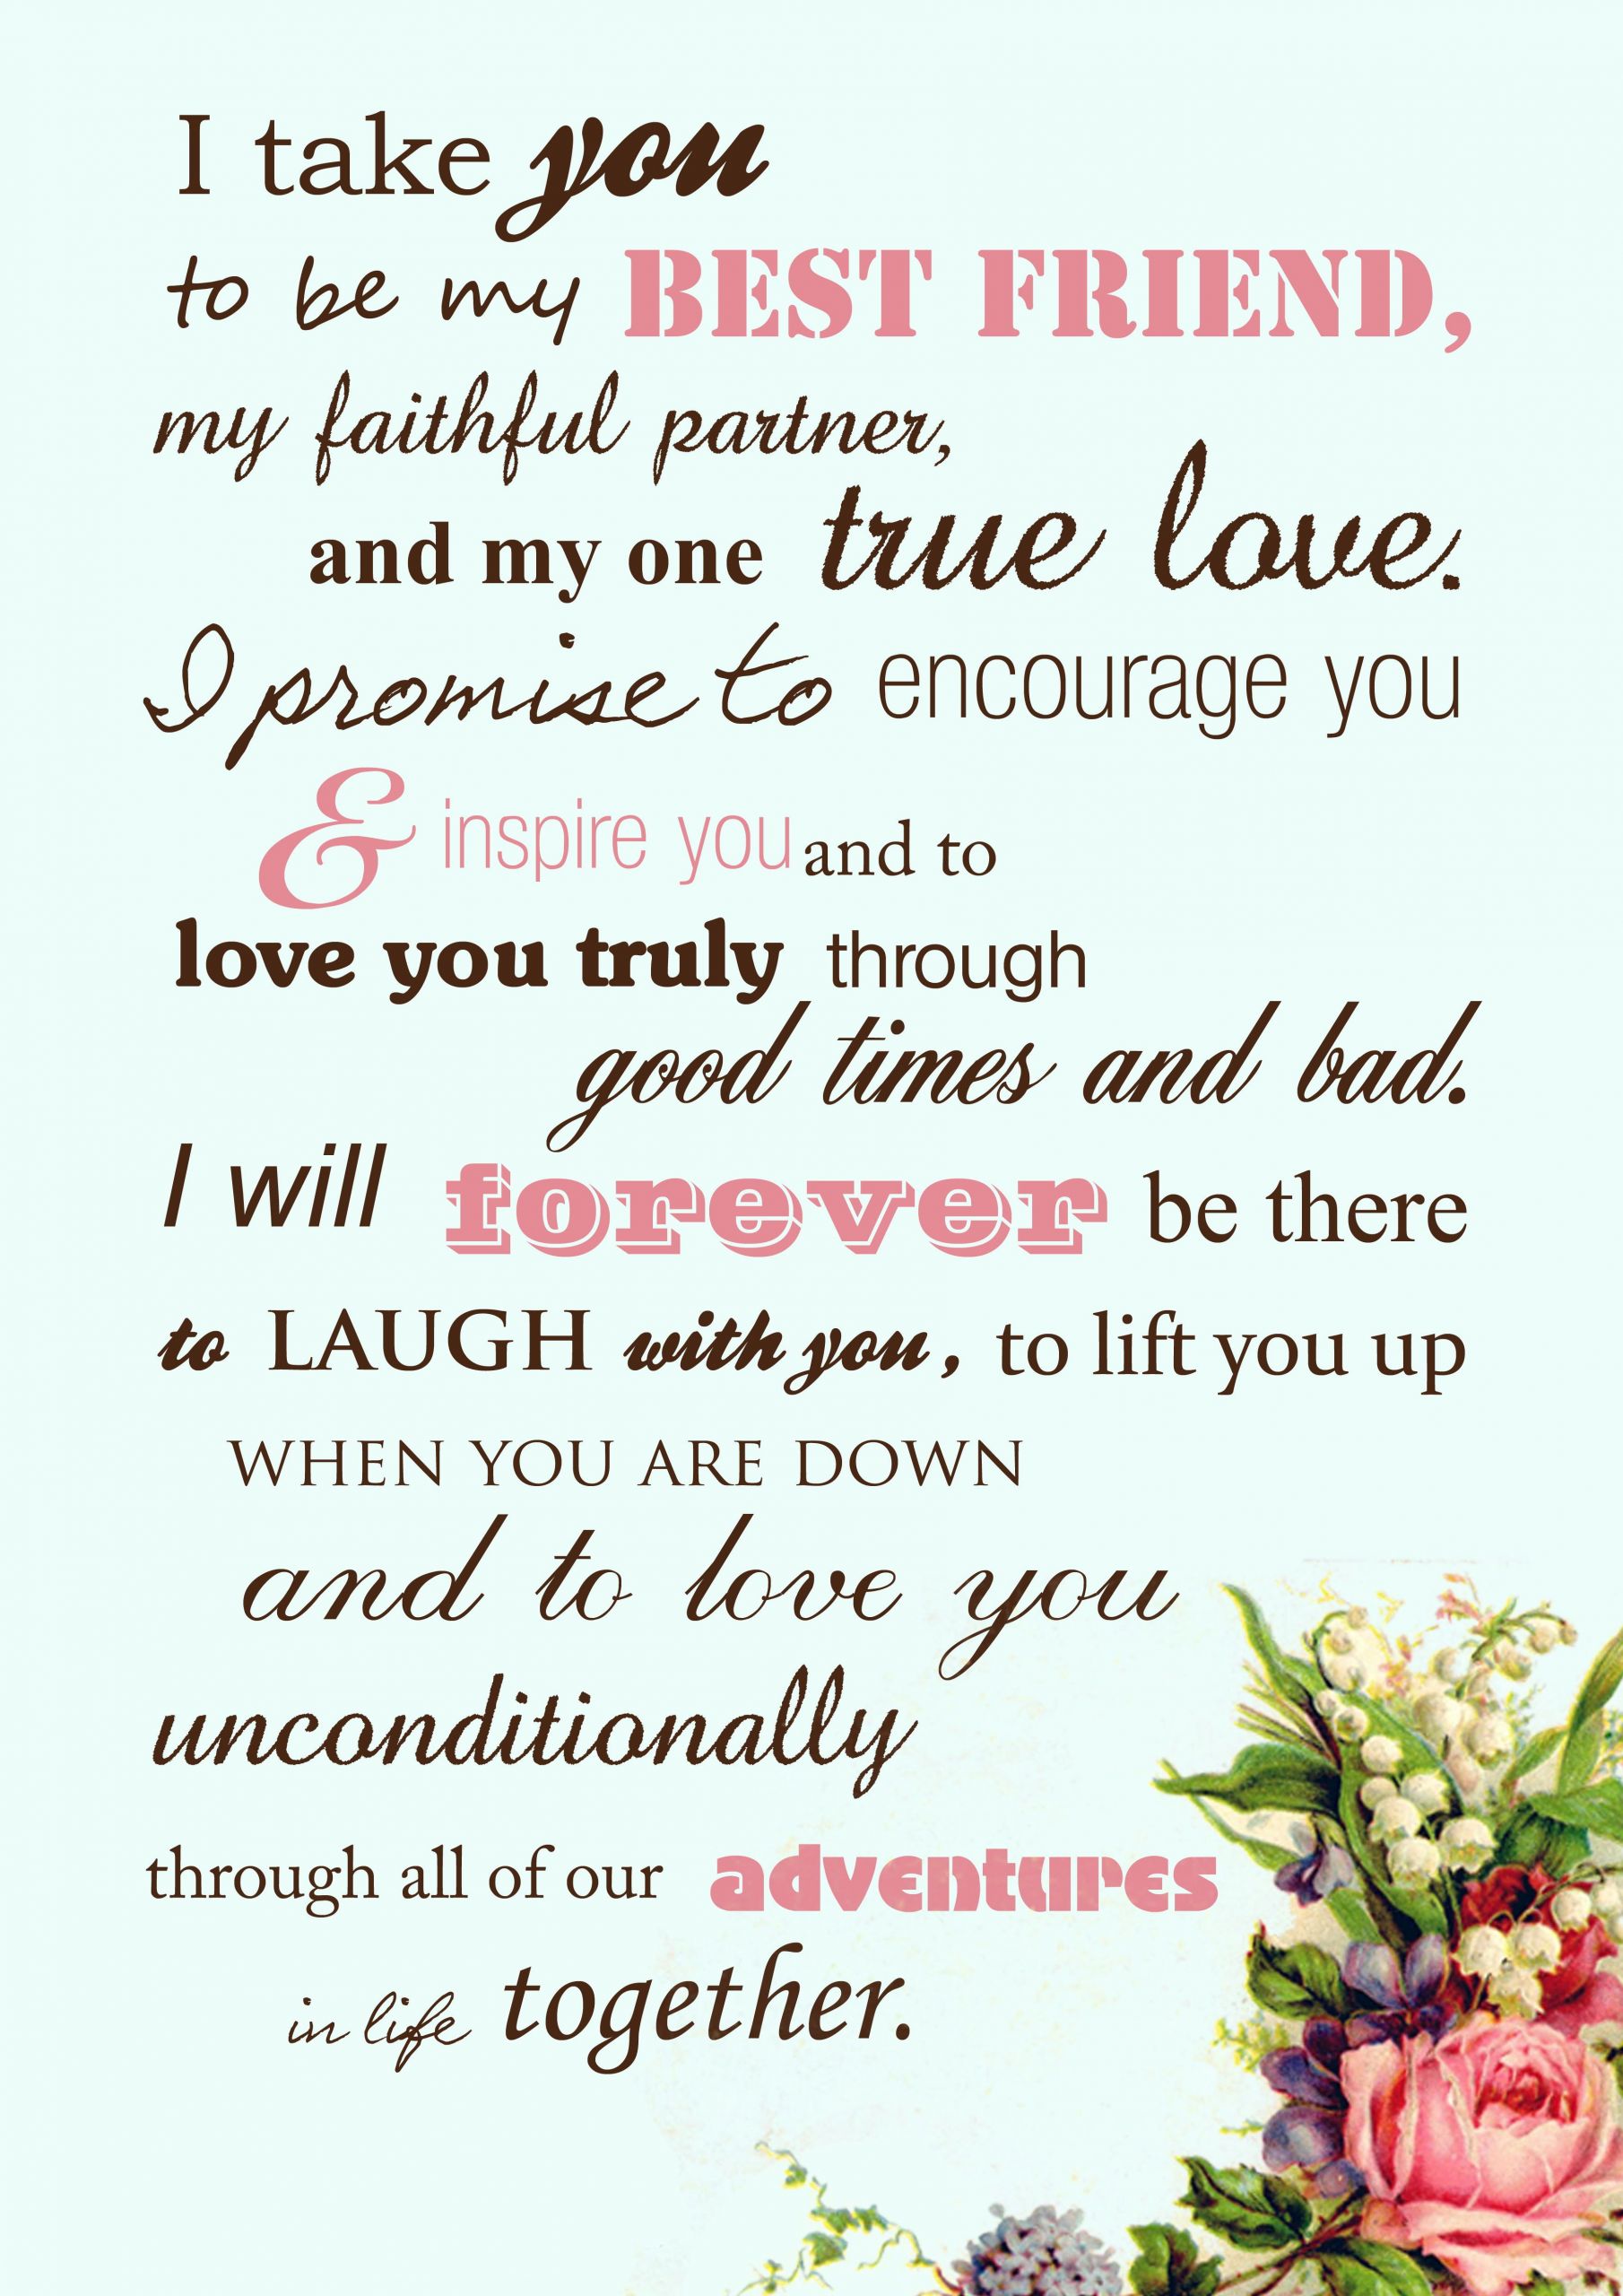 Vows Wedding
 Beautiful wedding vows instead of the traditional by the